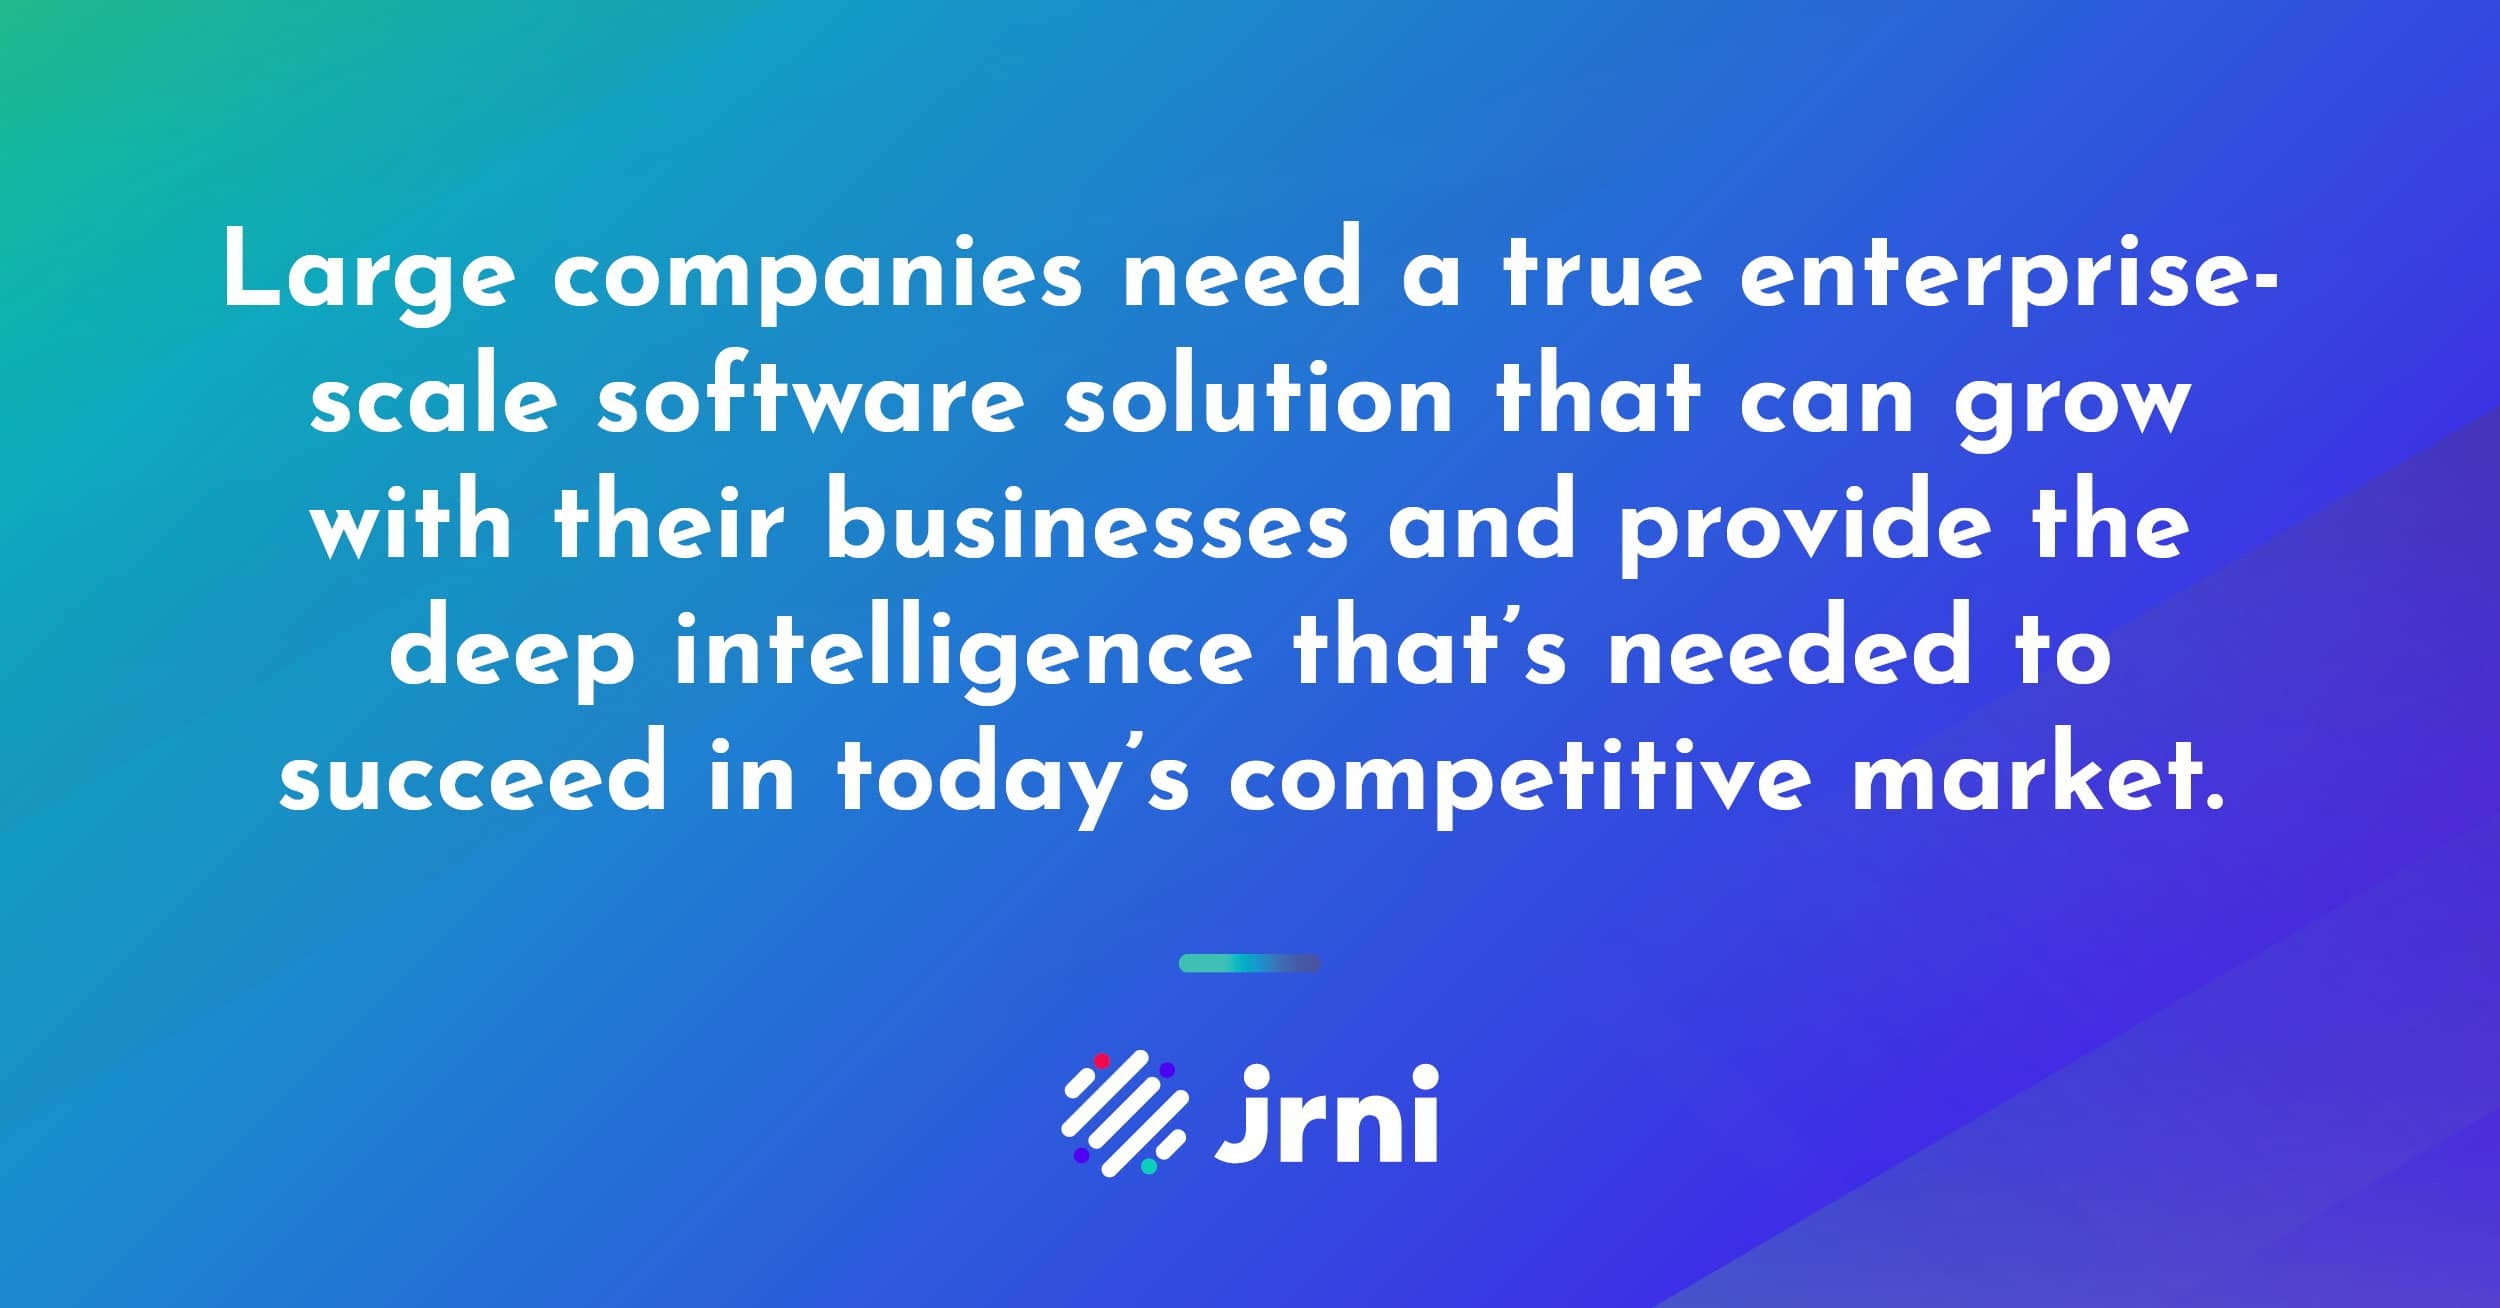 Large companies need a true enterprise-scale software solution that can grow with their businesses and provide the deep intelligence that’s needed to succeed in today’s competitive market.